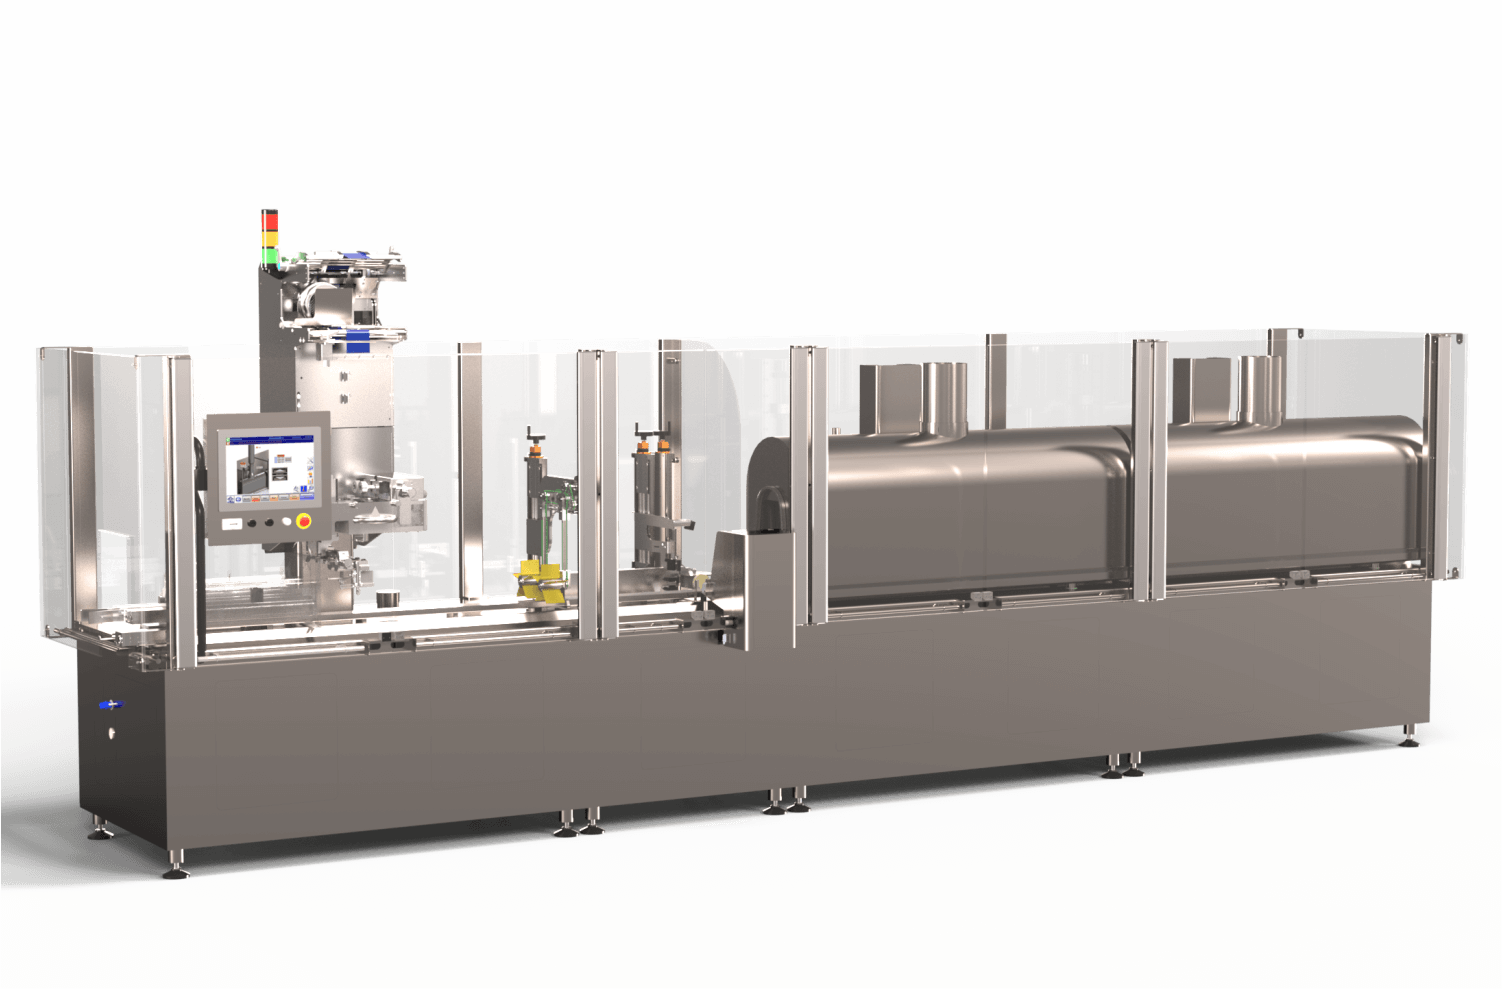 An Agile Packaging Equipment to fit your diverse productd' needs and Labels' sizes